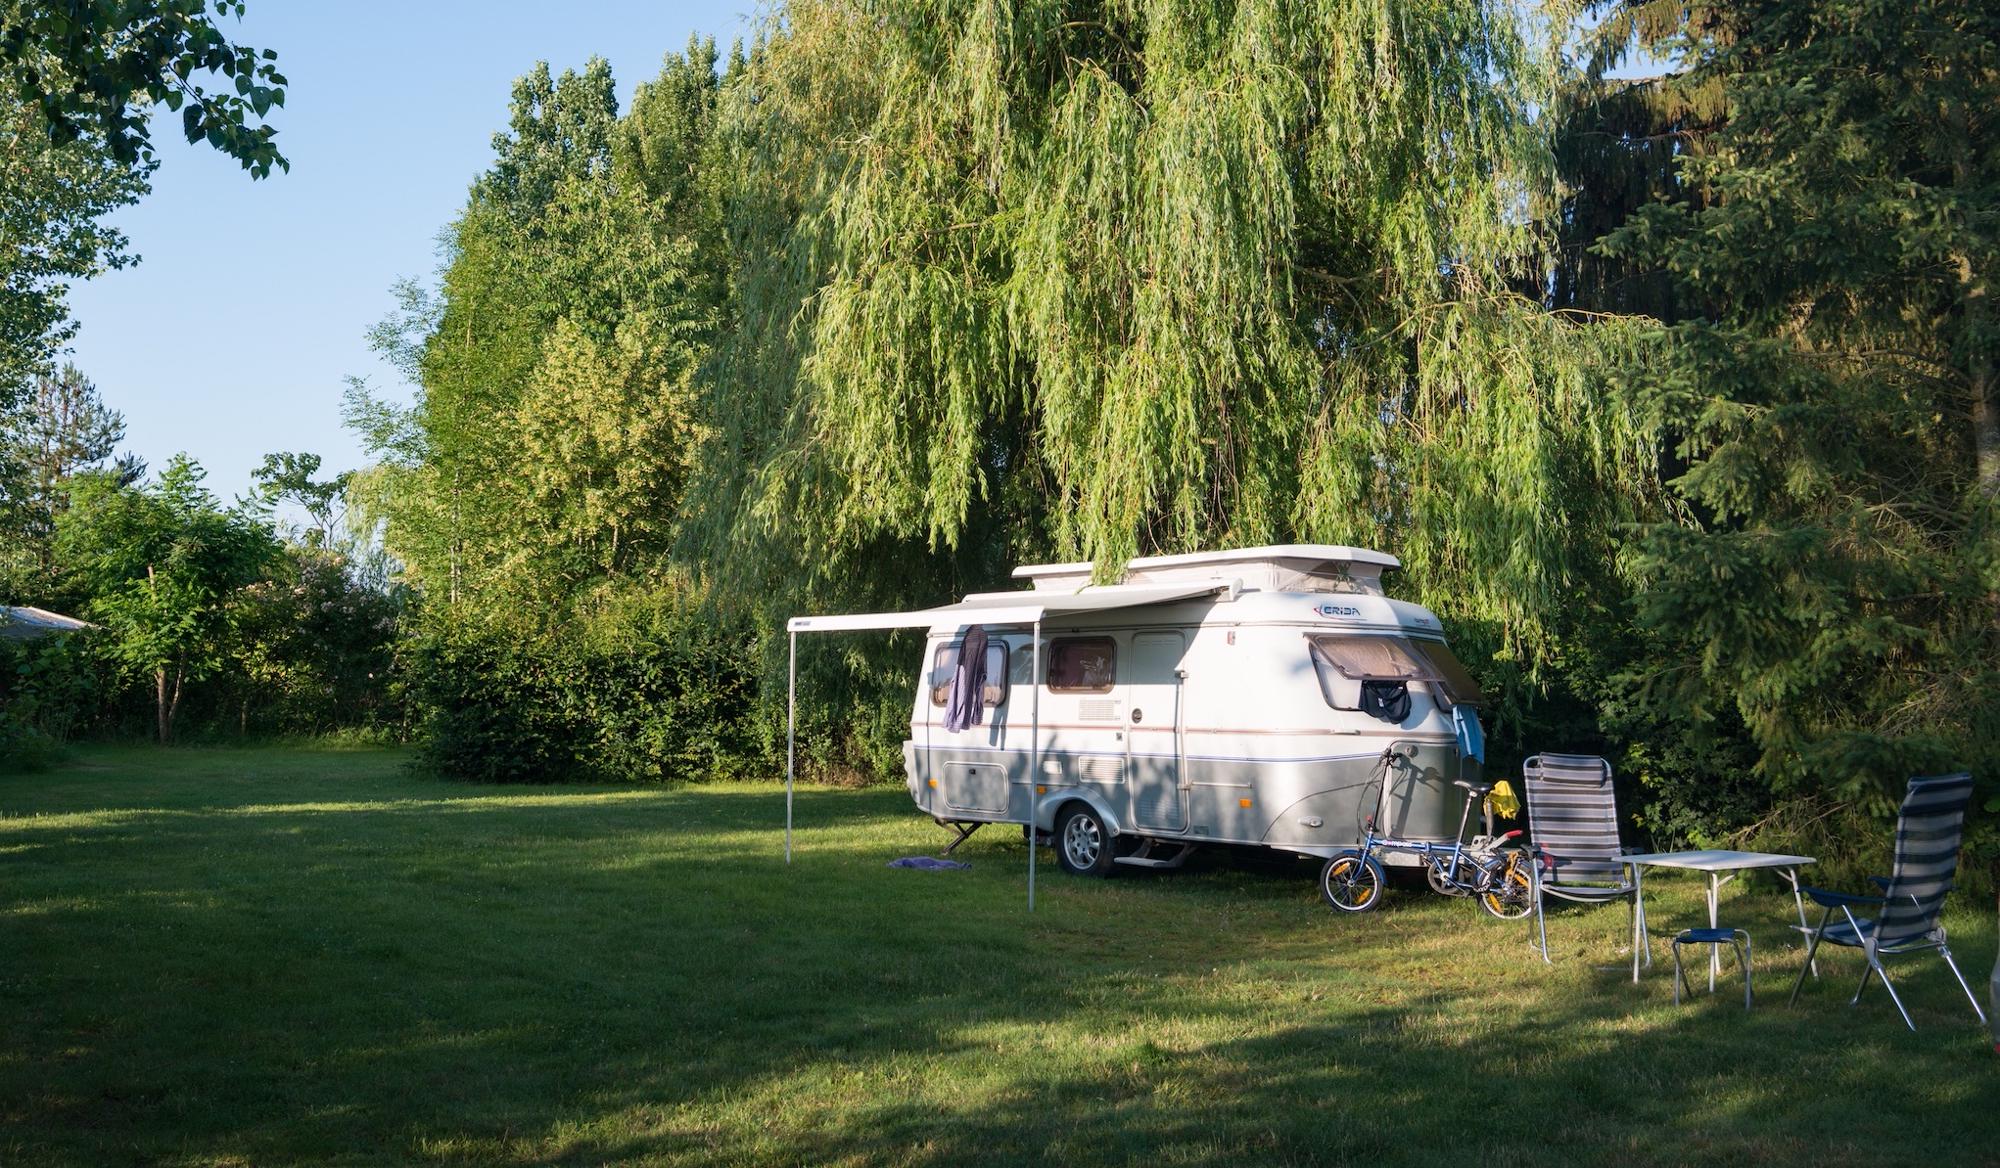 Accessible Campsites France | Wheelchair Access & Disabled Camping Facilities